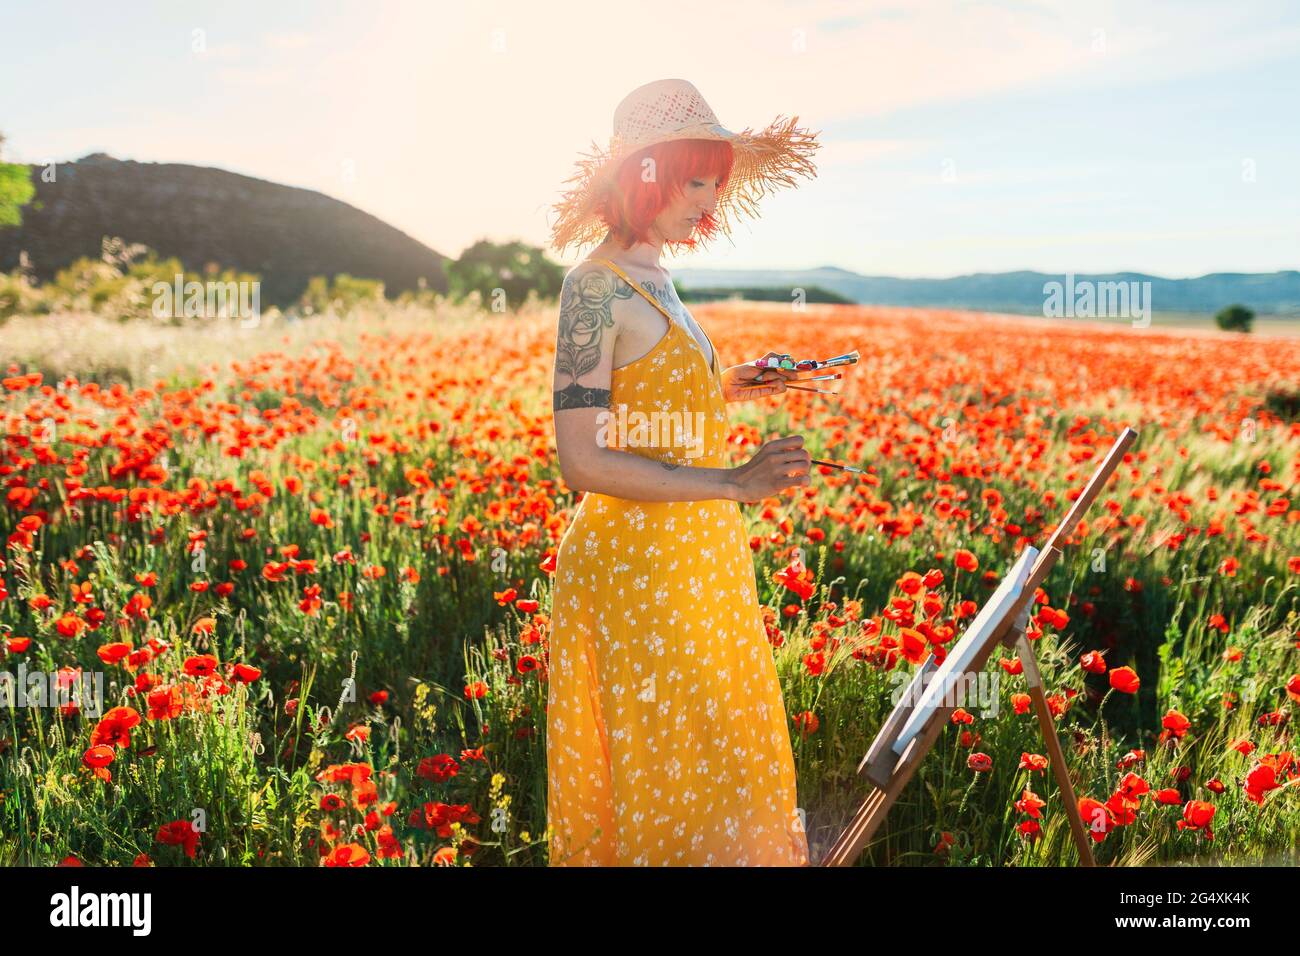 Mid adult female artist in yellow sundress painting on poppy field Stock Photo